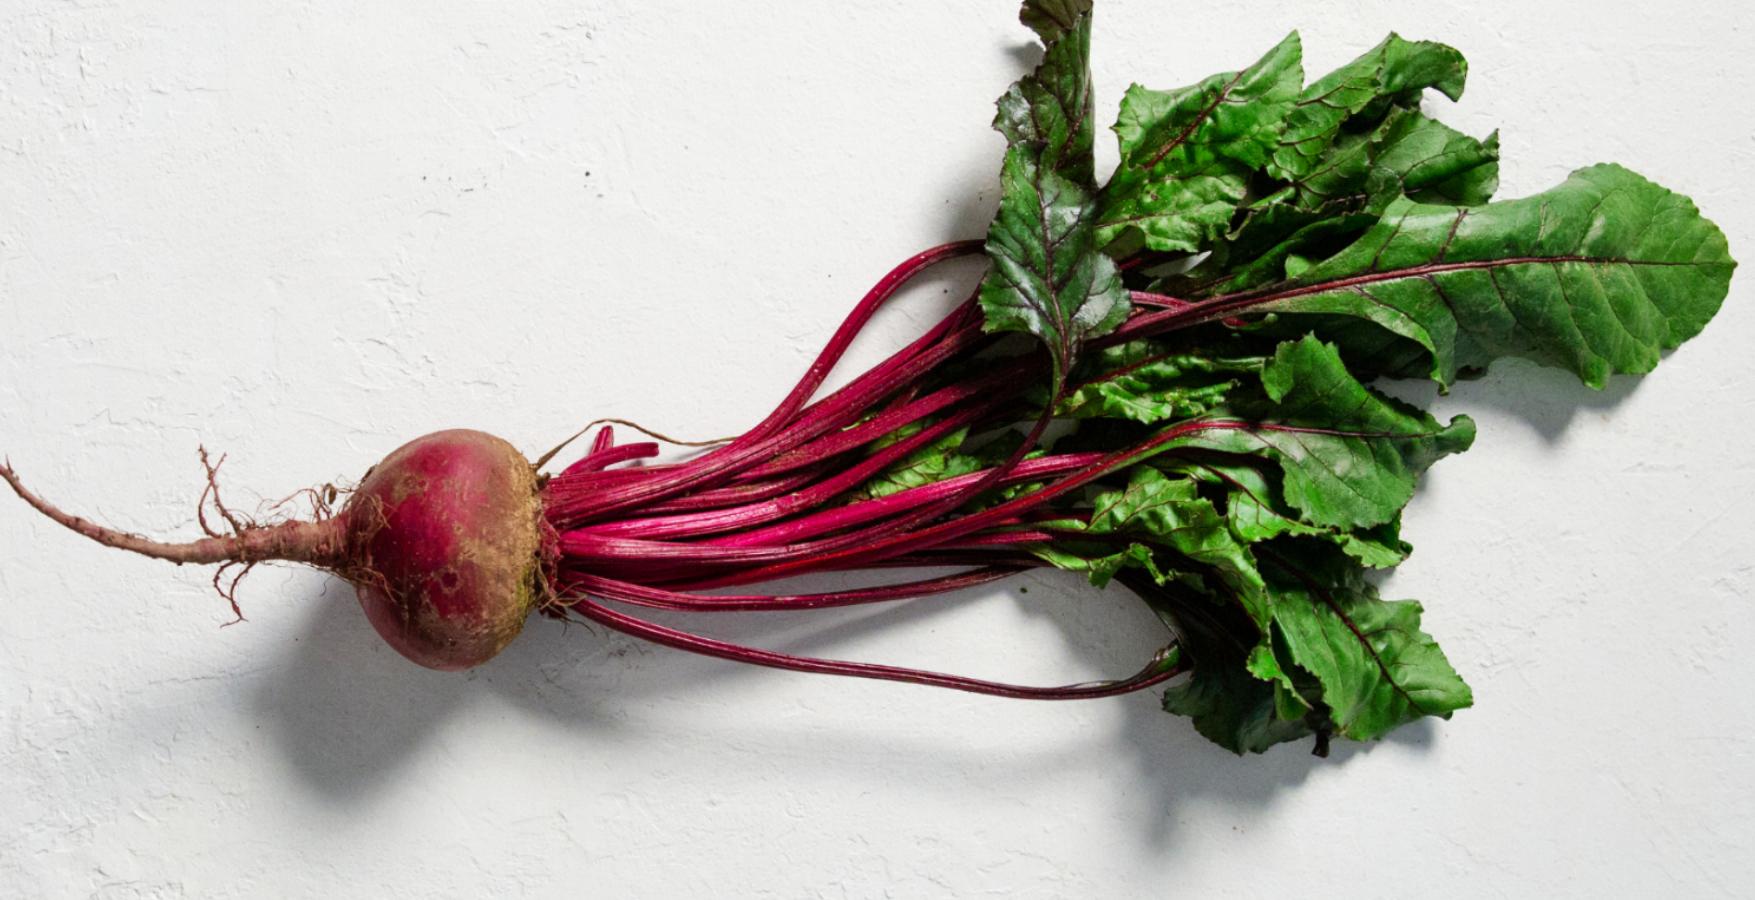 Beetroot with roots and leaves